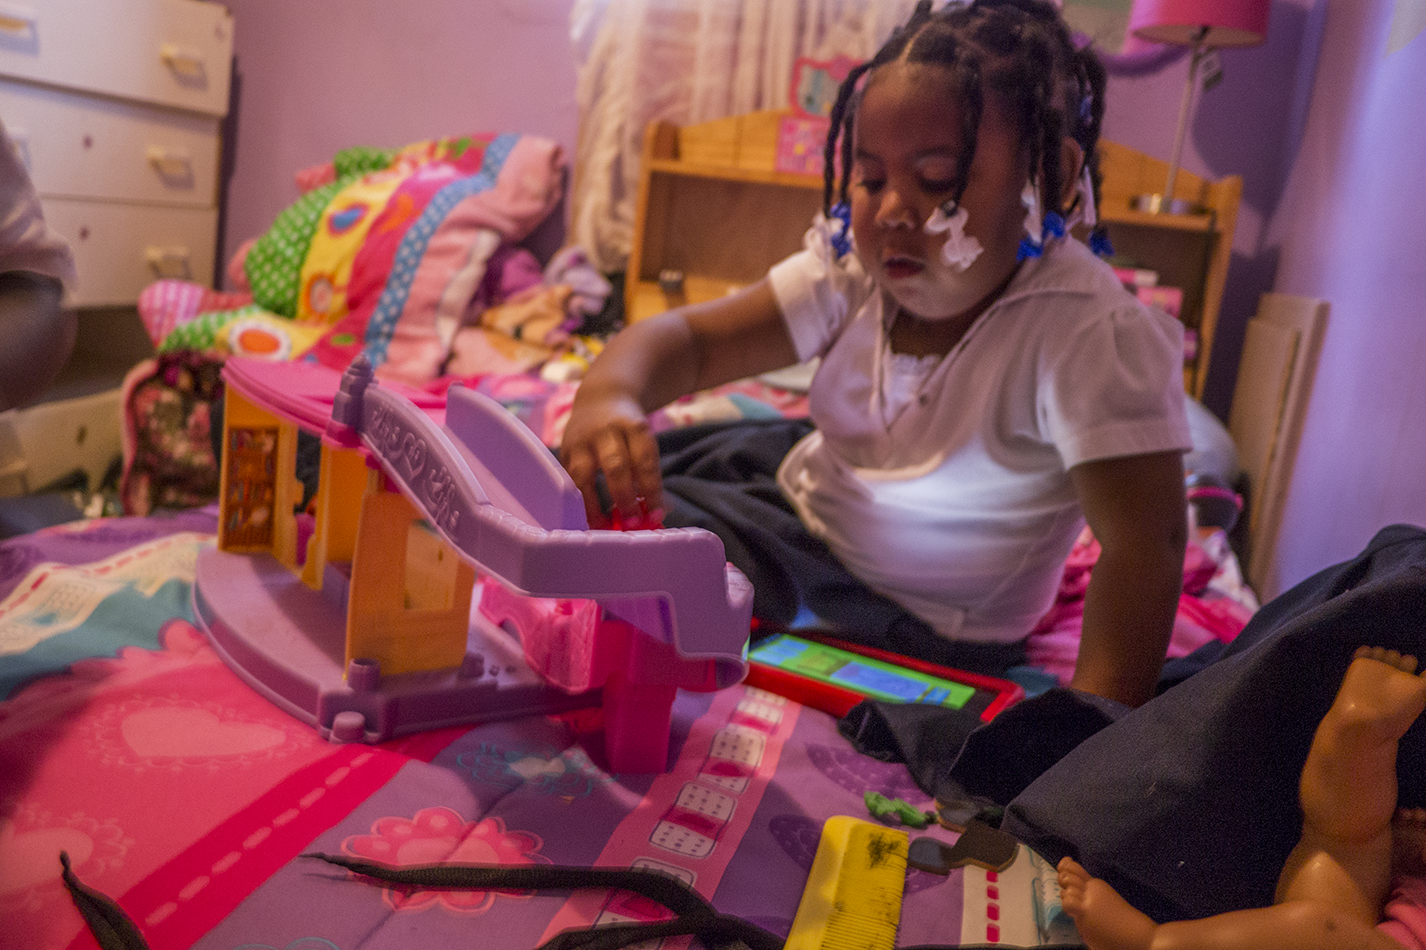 Robertson's daughter Kyi'Lei plays with toys in her bedroom. - IAIN MAITLAND